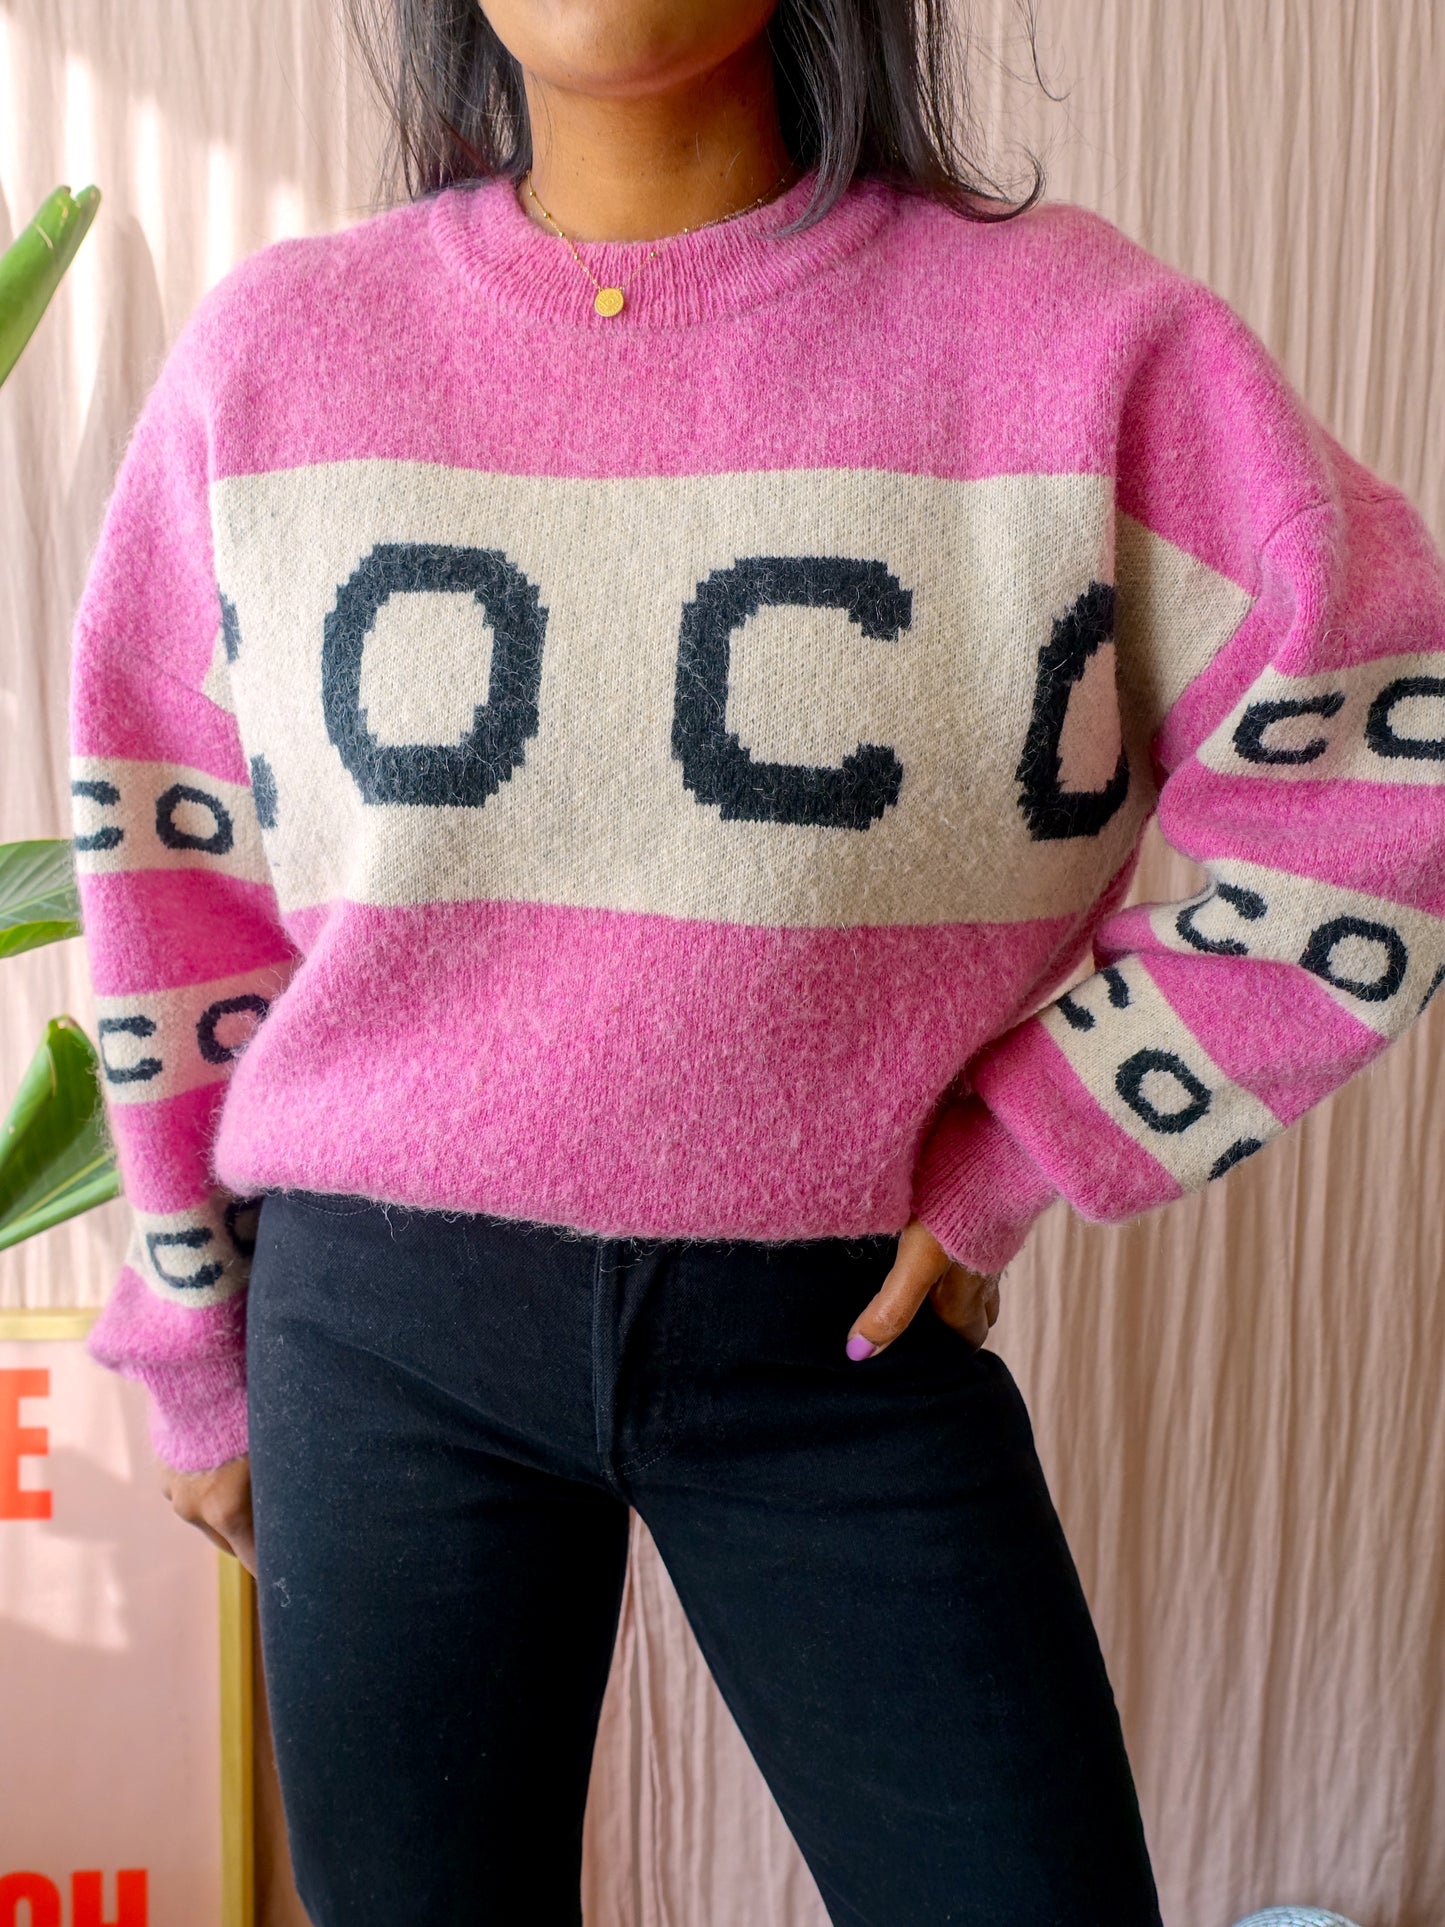 Co'couture leona wool knit poppy pink